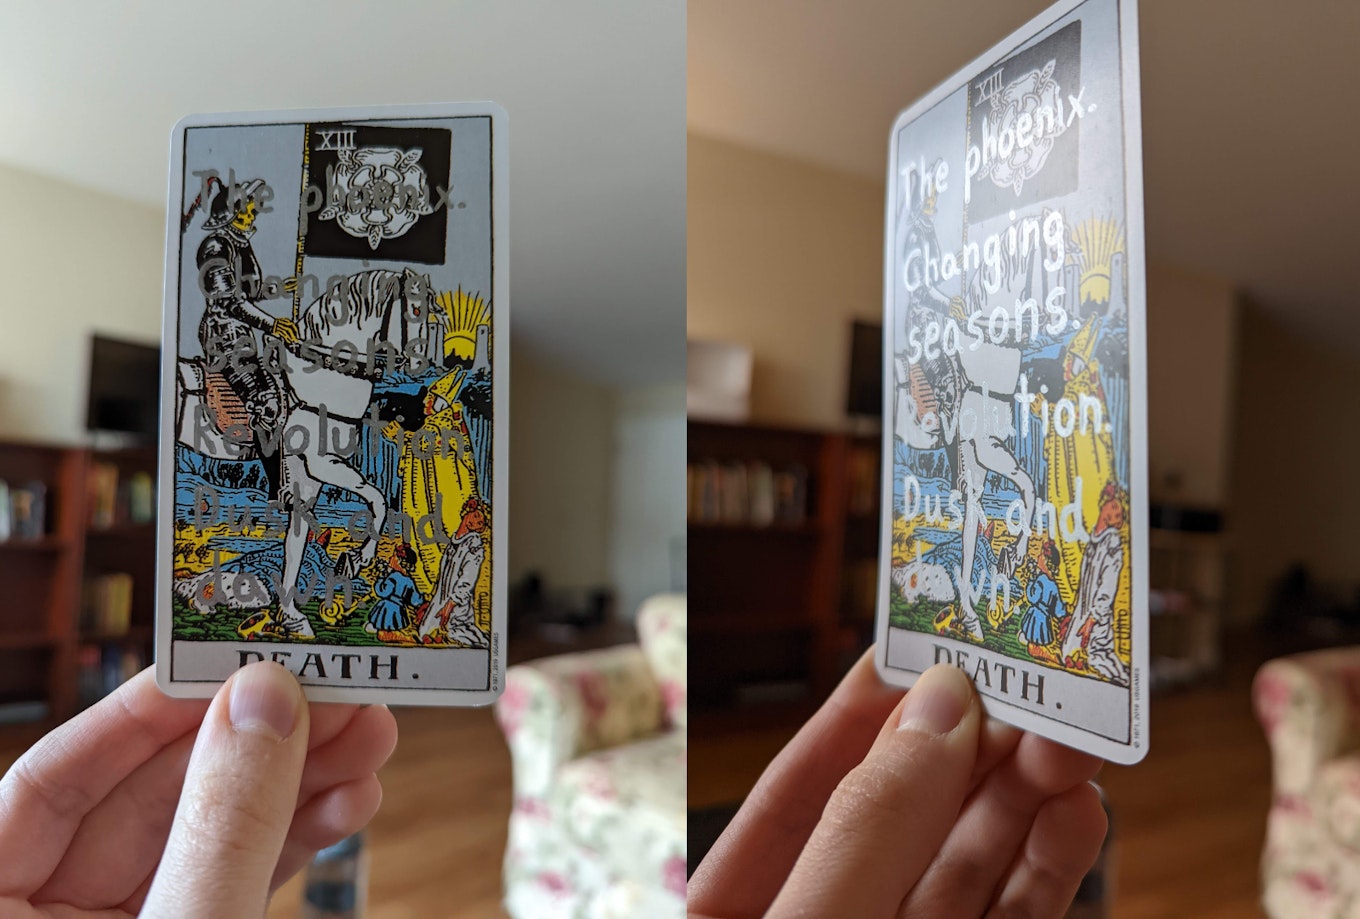 Two pictures side-by-side. The first shows the tarot card Death, facing the camera directly. Silver text has been written on its face, though it is difficult to read. The second picture shows the same tarot card but tilted to the side to catch the sun, which makes the text legible. It reads: "The phoenix. Changing seasons. Revolution. Dusk and dawn.